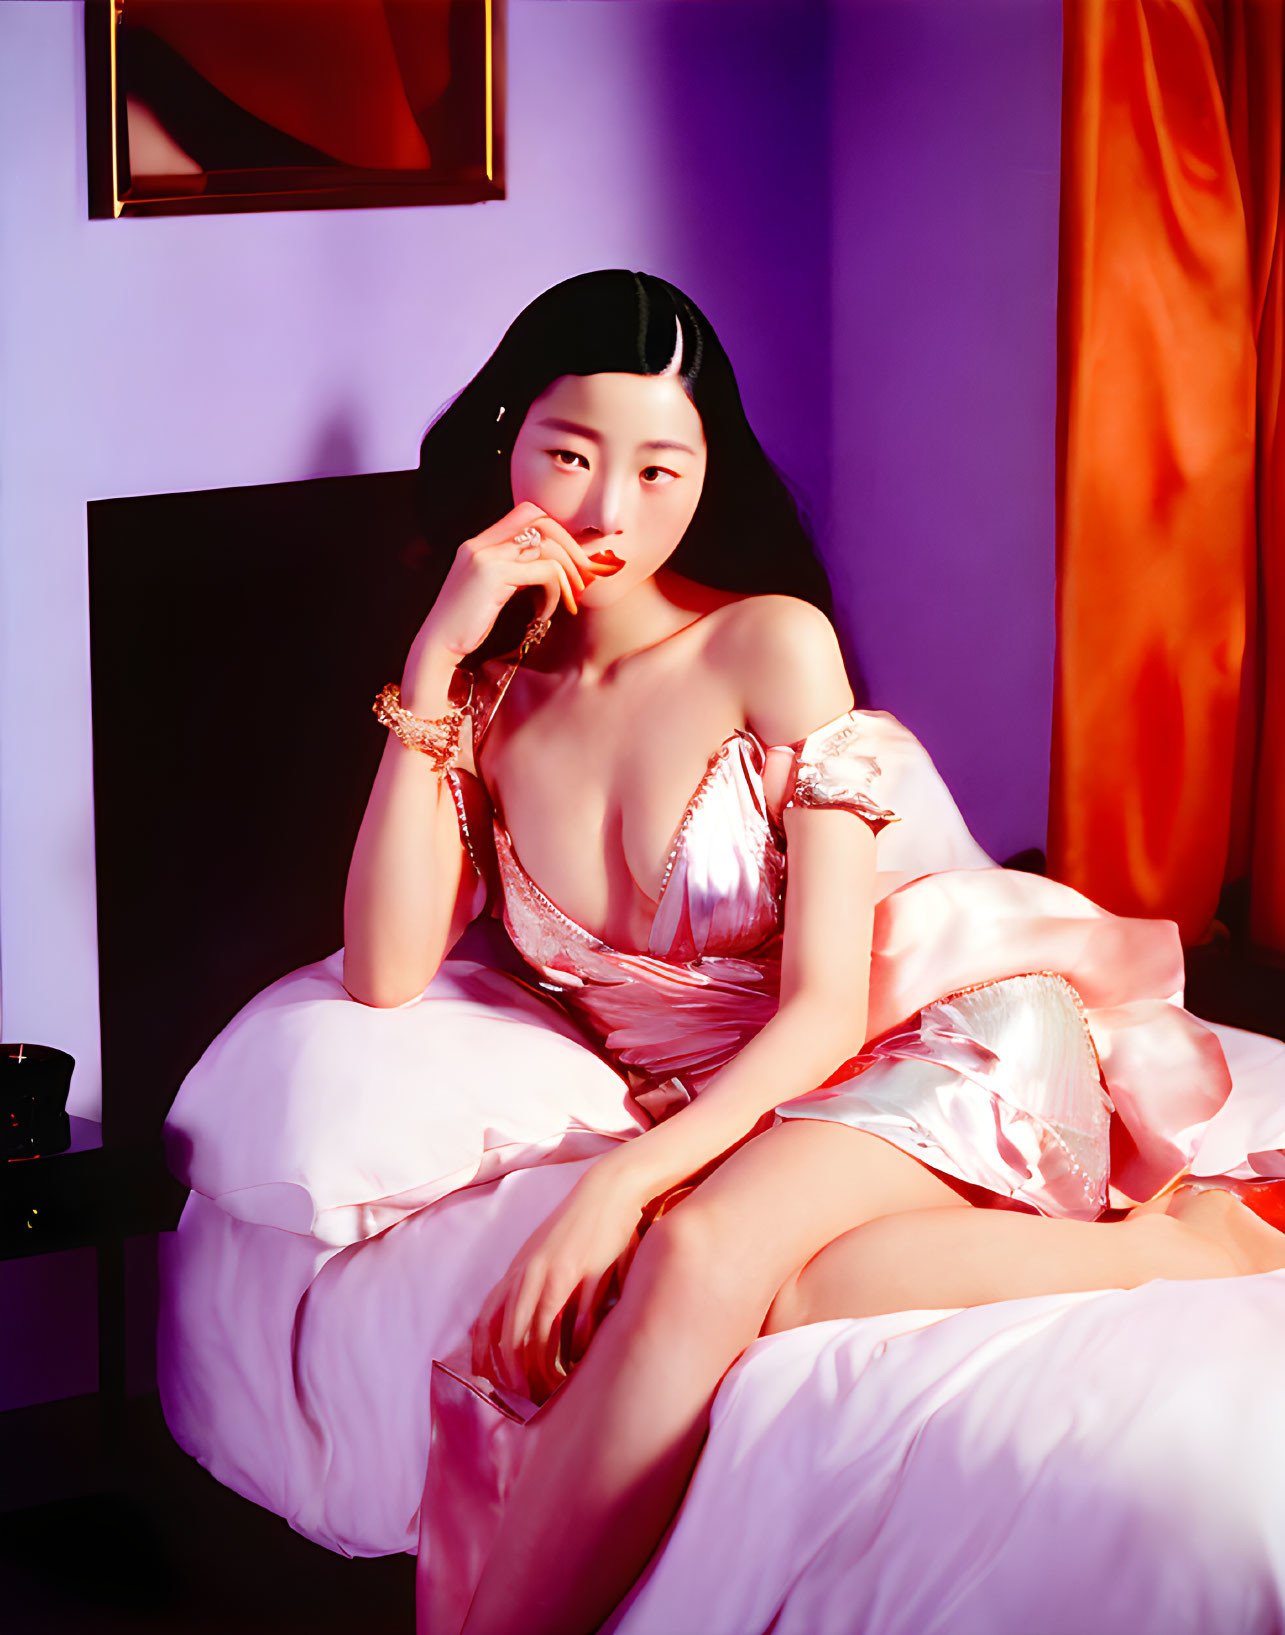 Woman in silk dress on pink bed with violet walls and orange drapes